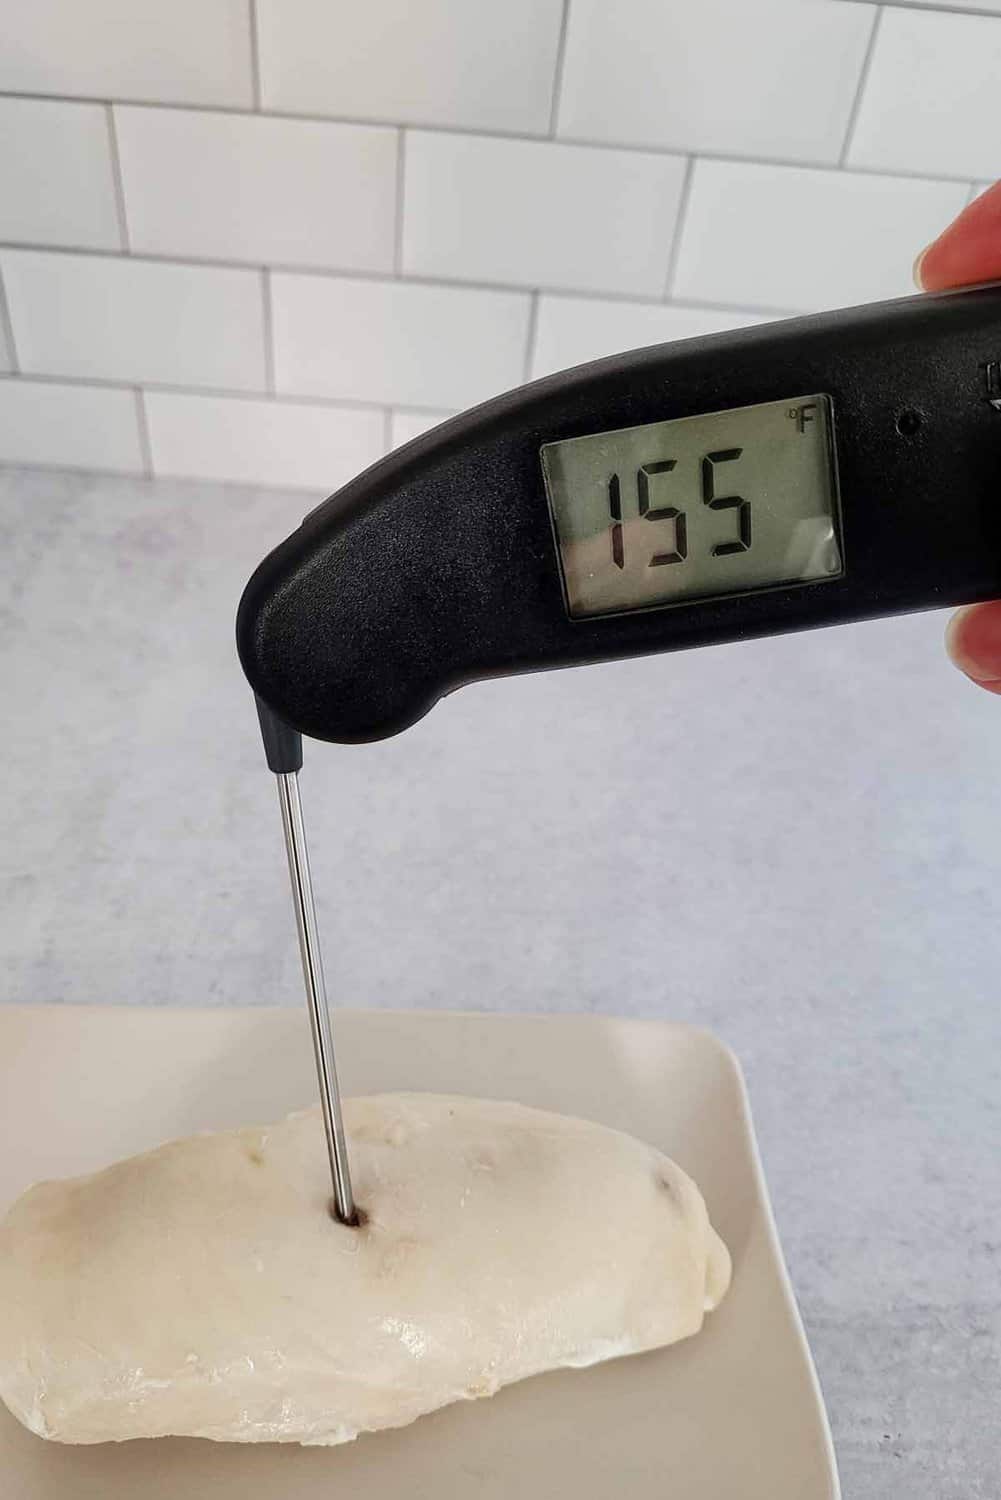 food thermometer in cooked chicken showing temperature of 155 degrees F